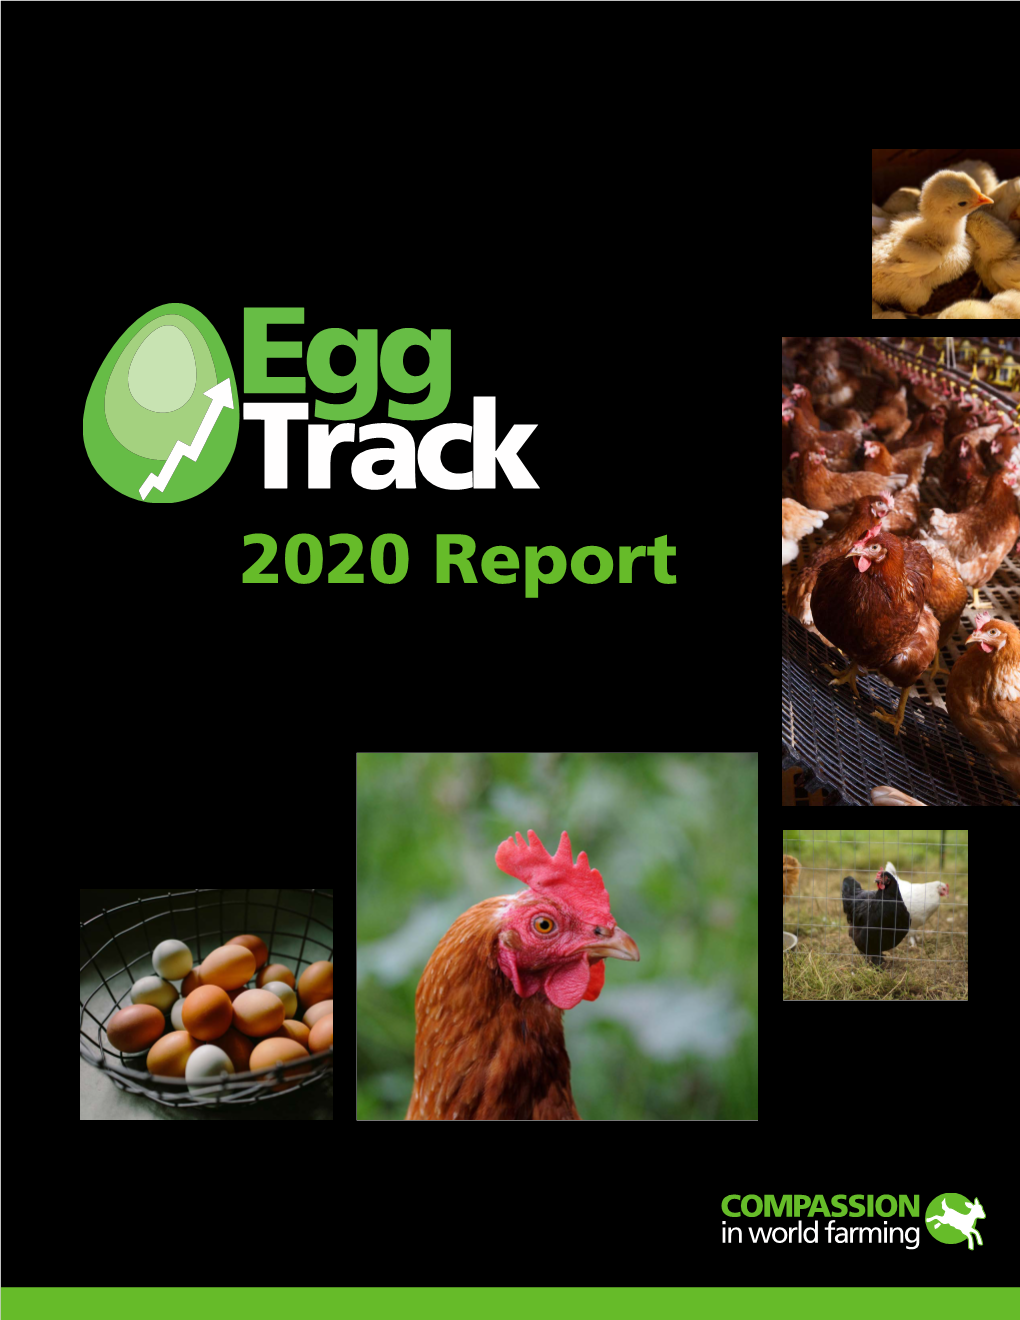 Egg-Laying Hens 2020 Eggtrack Report Read More